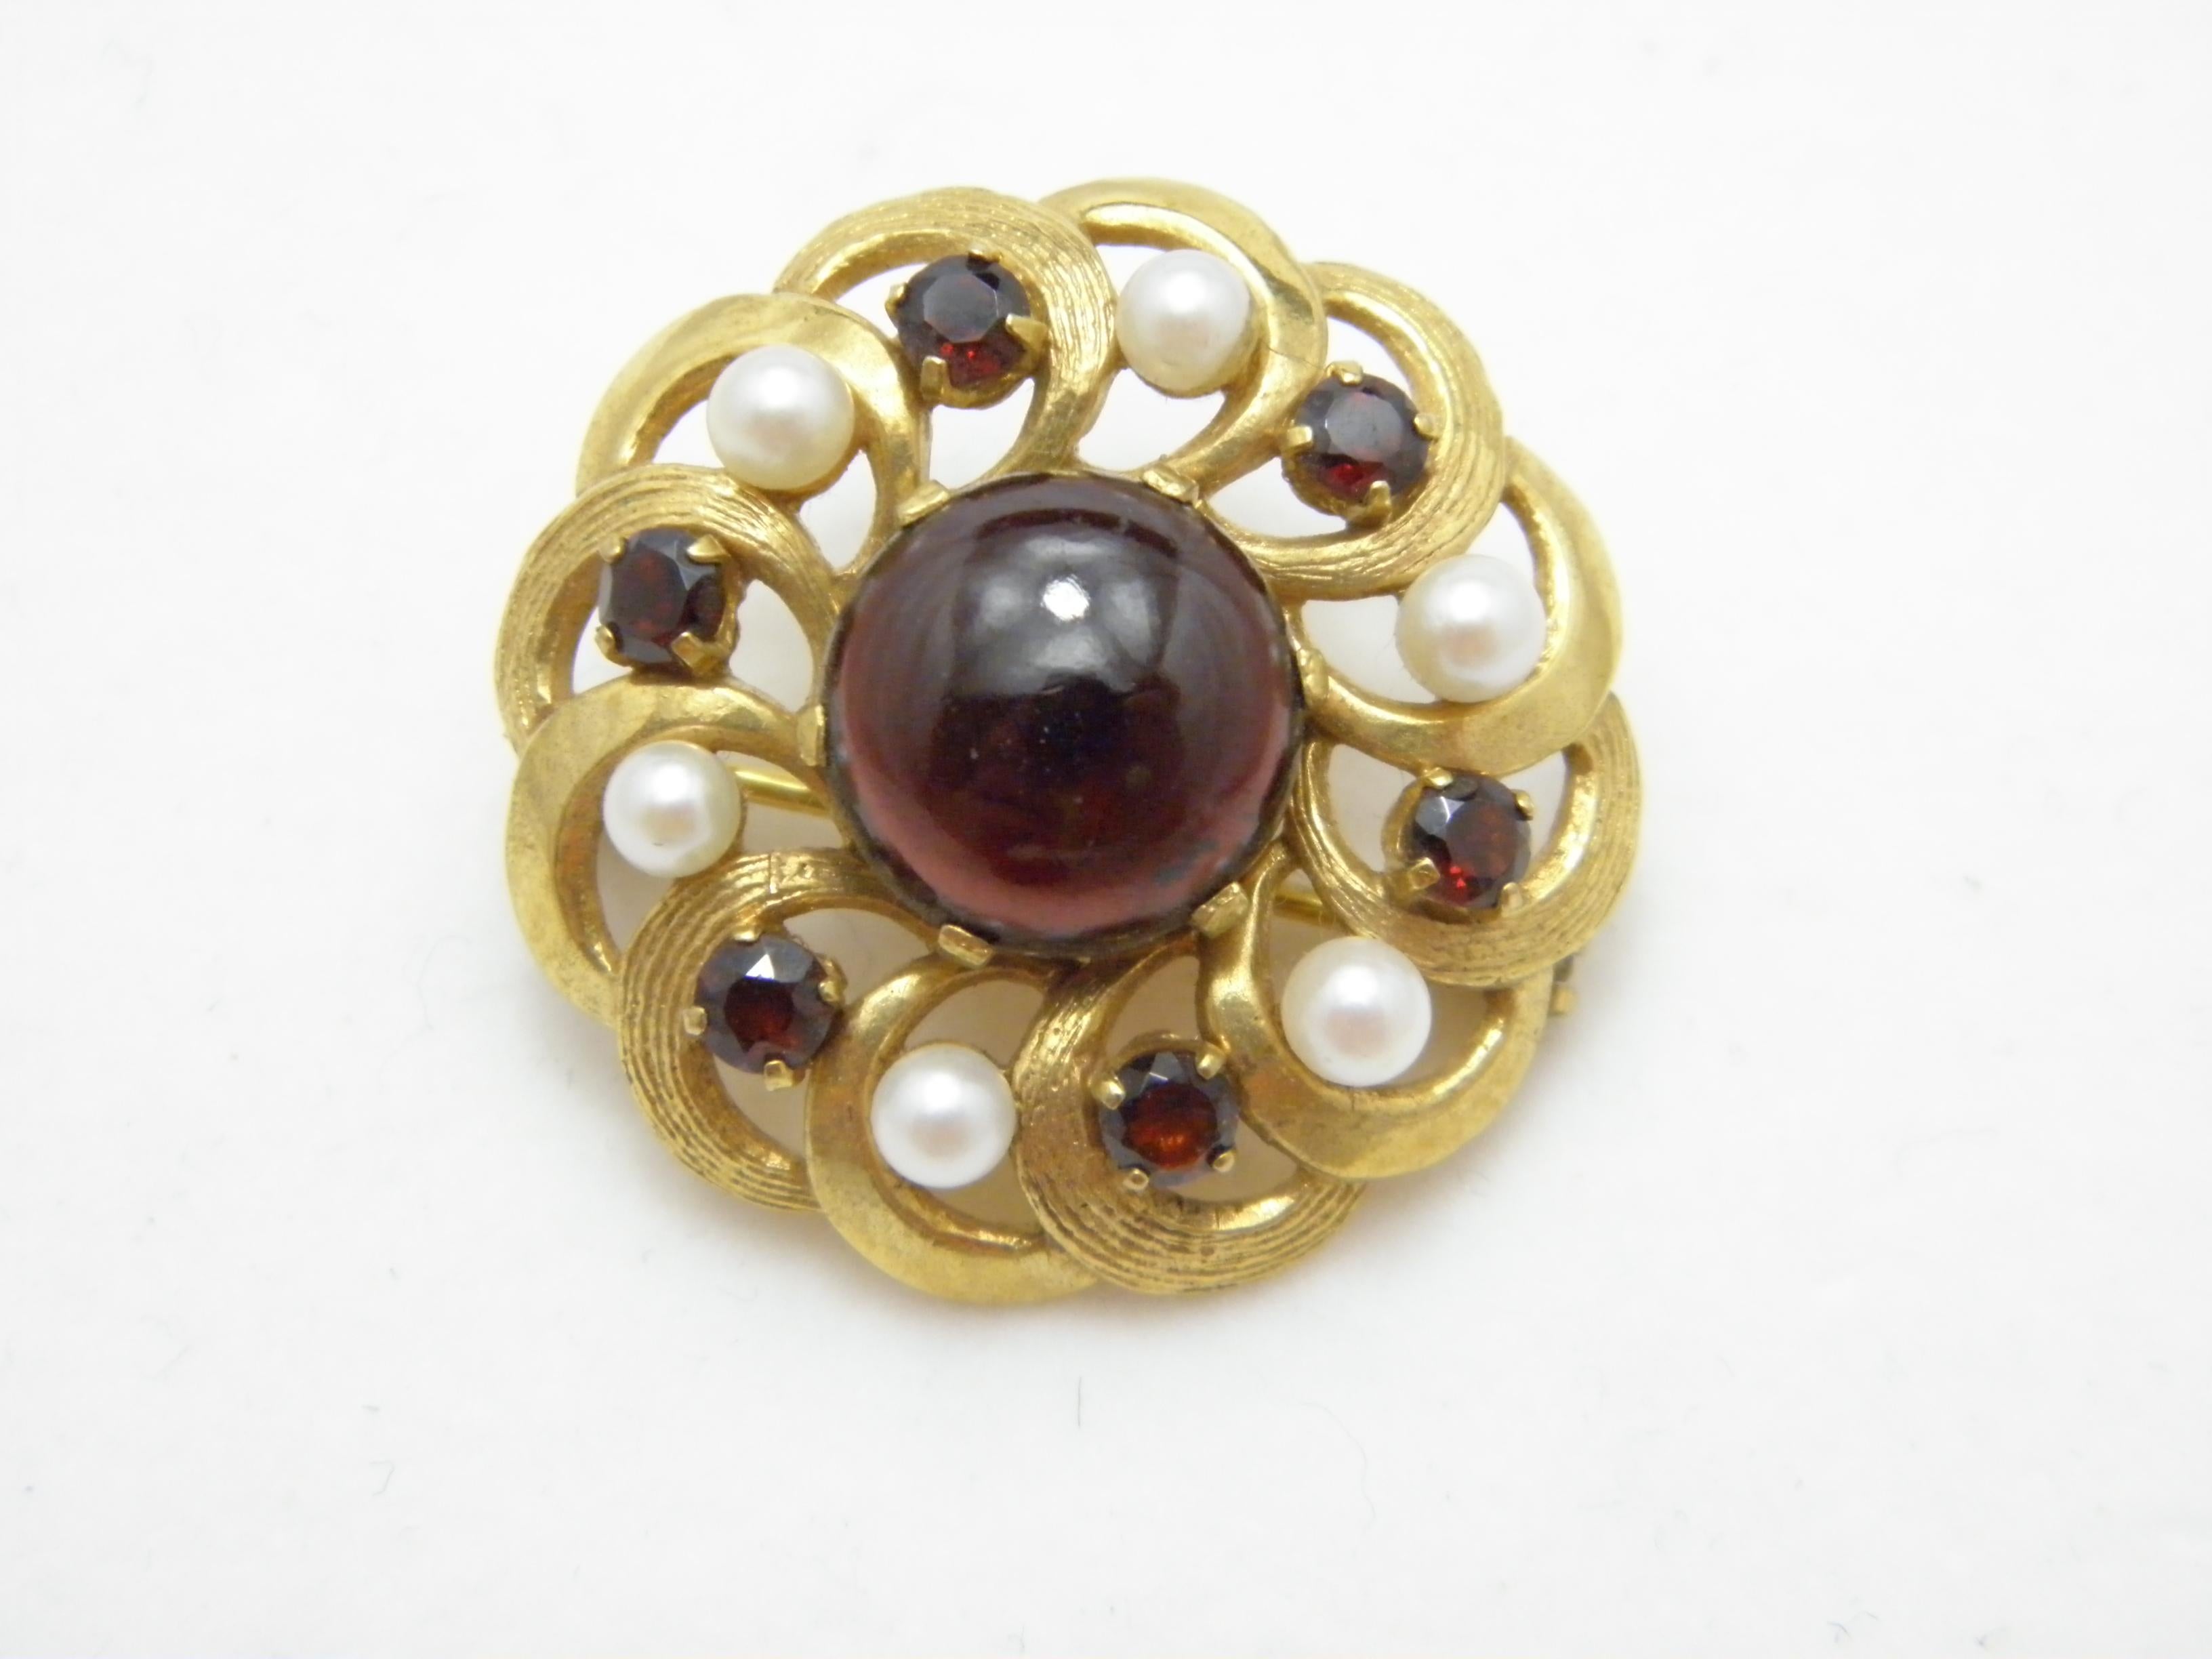 If you have landed on this page then you have an eye for beauty.

On offer is this gorgeous

9CT HEAVY GOLD NATURAL GARNET AND PEARL TARGET BROOCH

DETAILS
Material: 9ct (375/000) Solid Heavy Yellow Gold
Style: Victorian classic brooch / pin in the